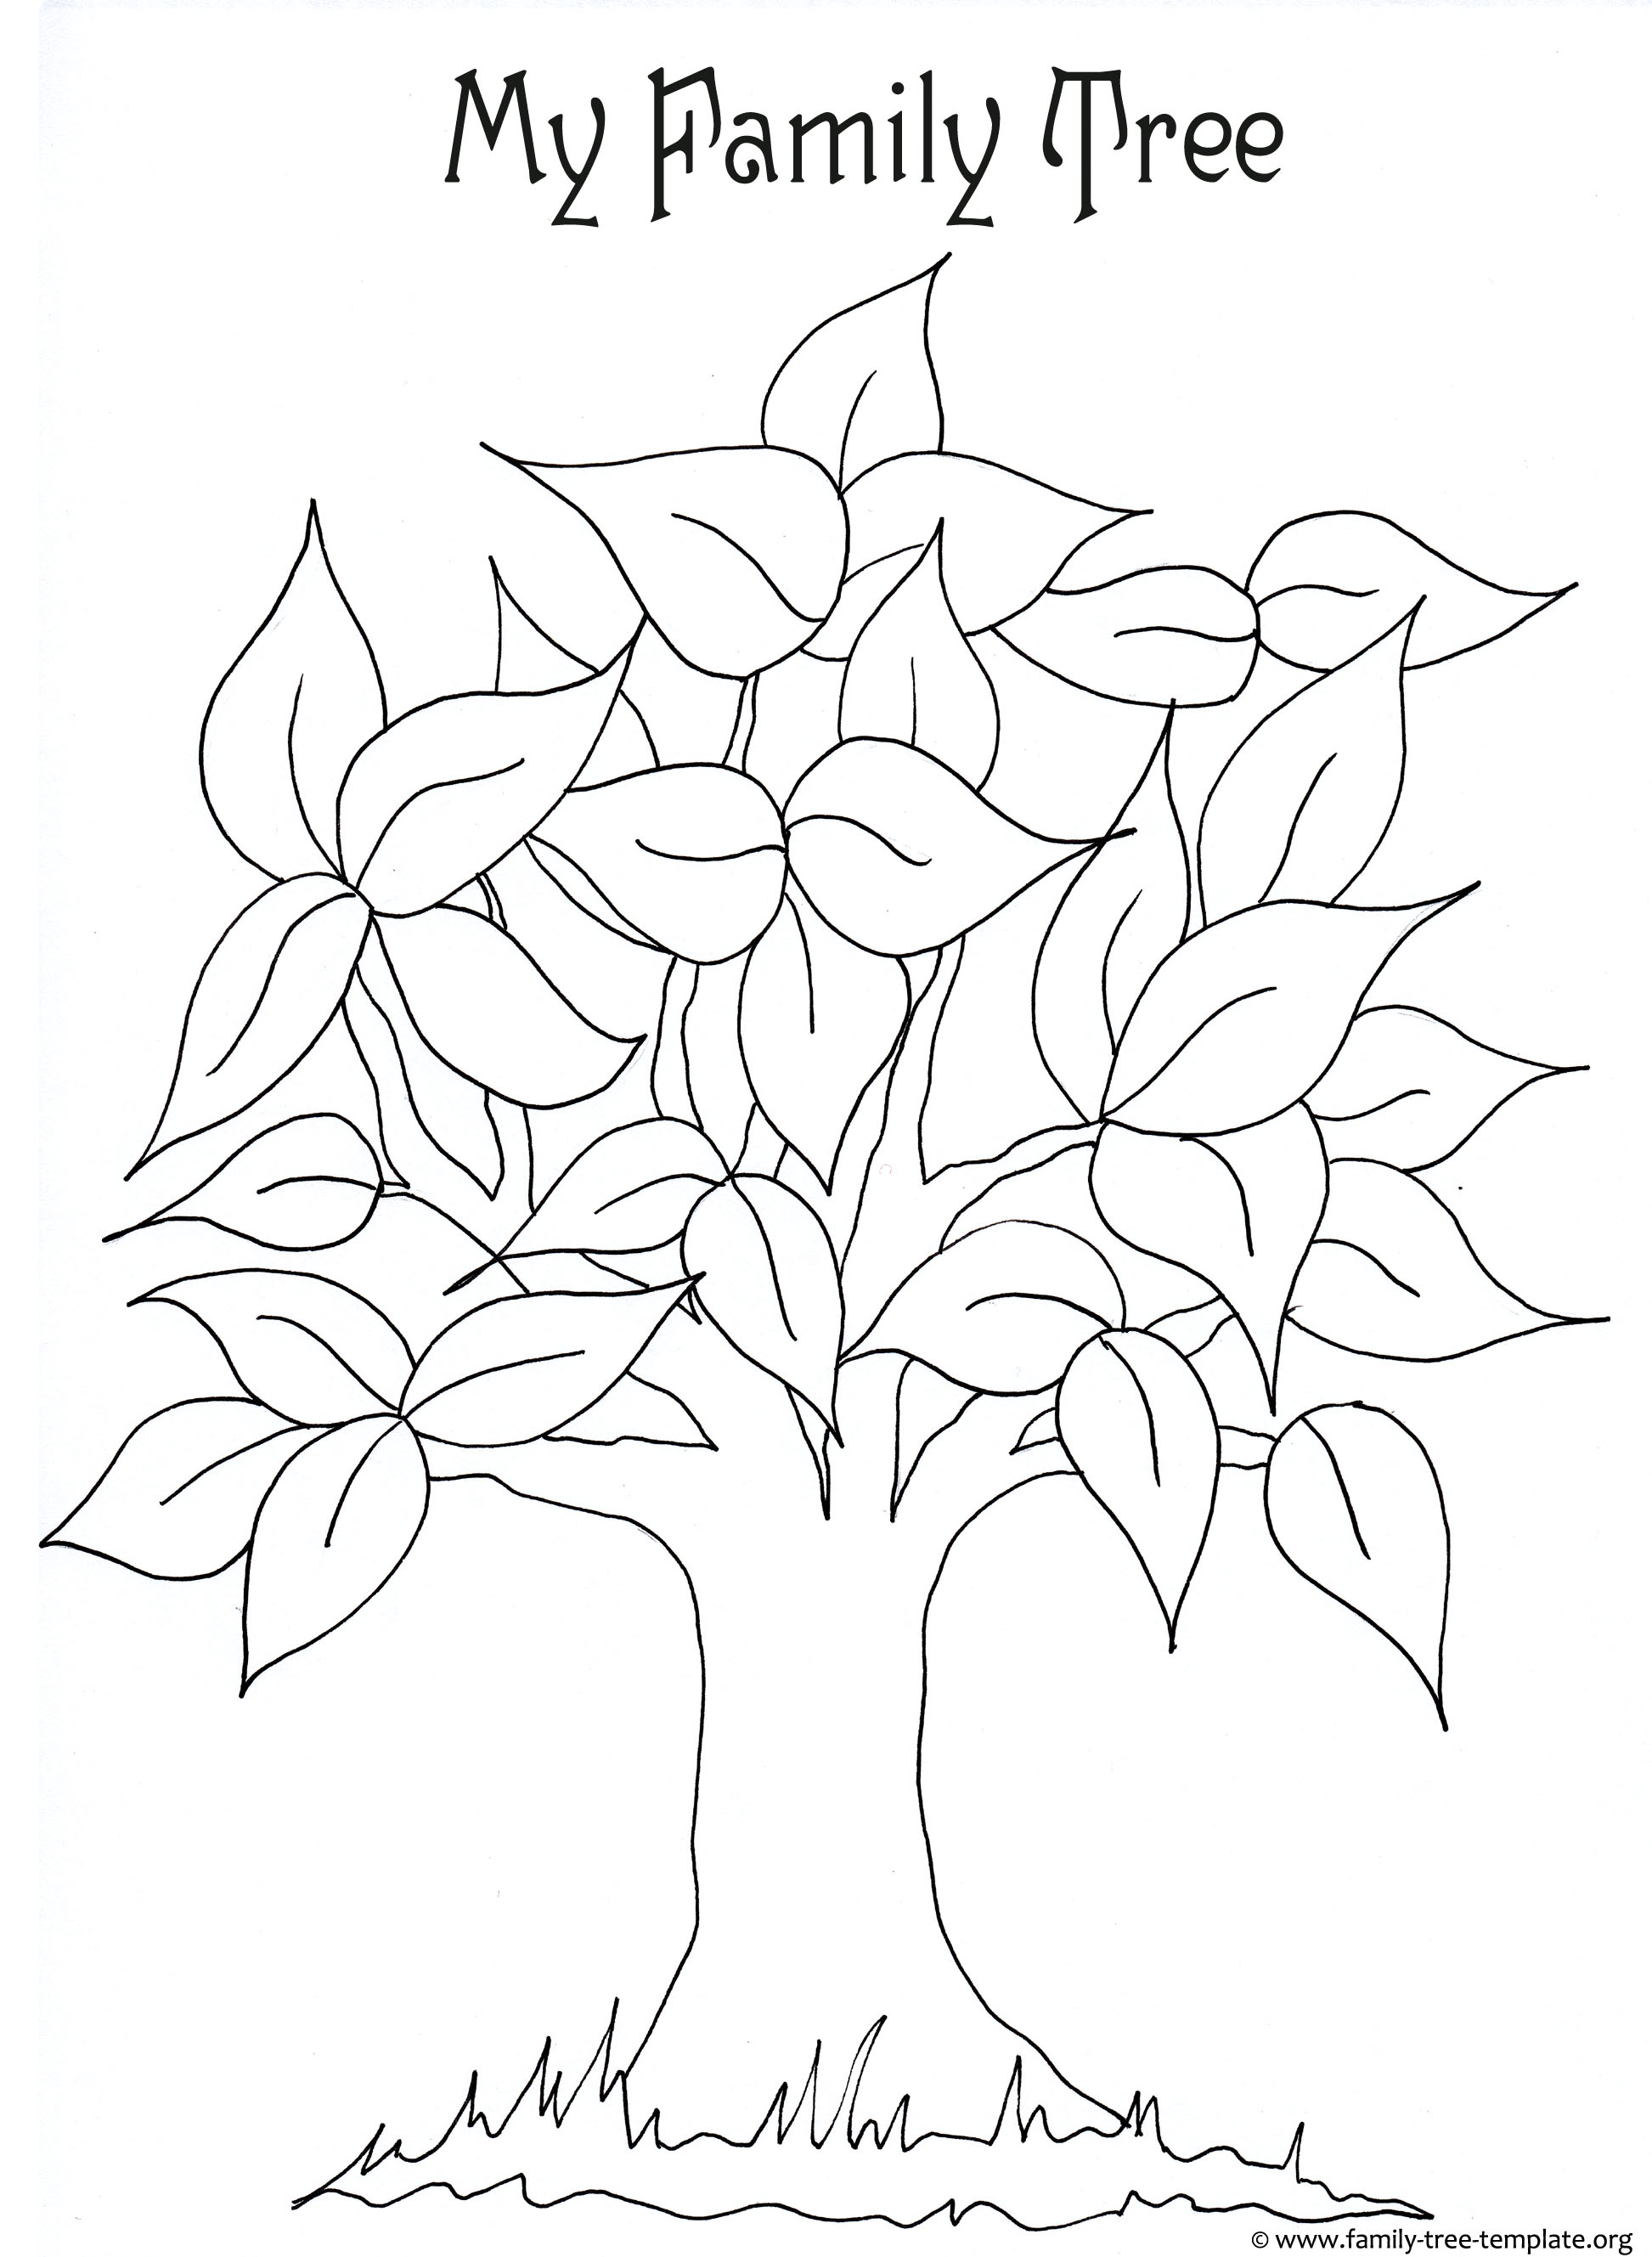 Free printable coloring page for kids with leaves and tree trunk to color.